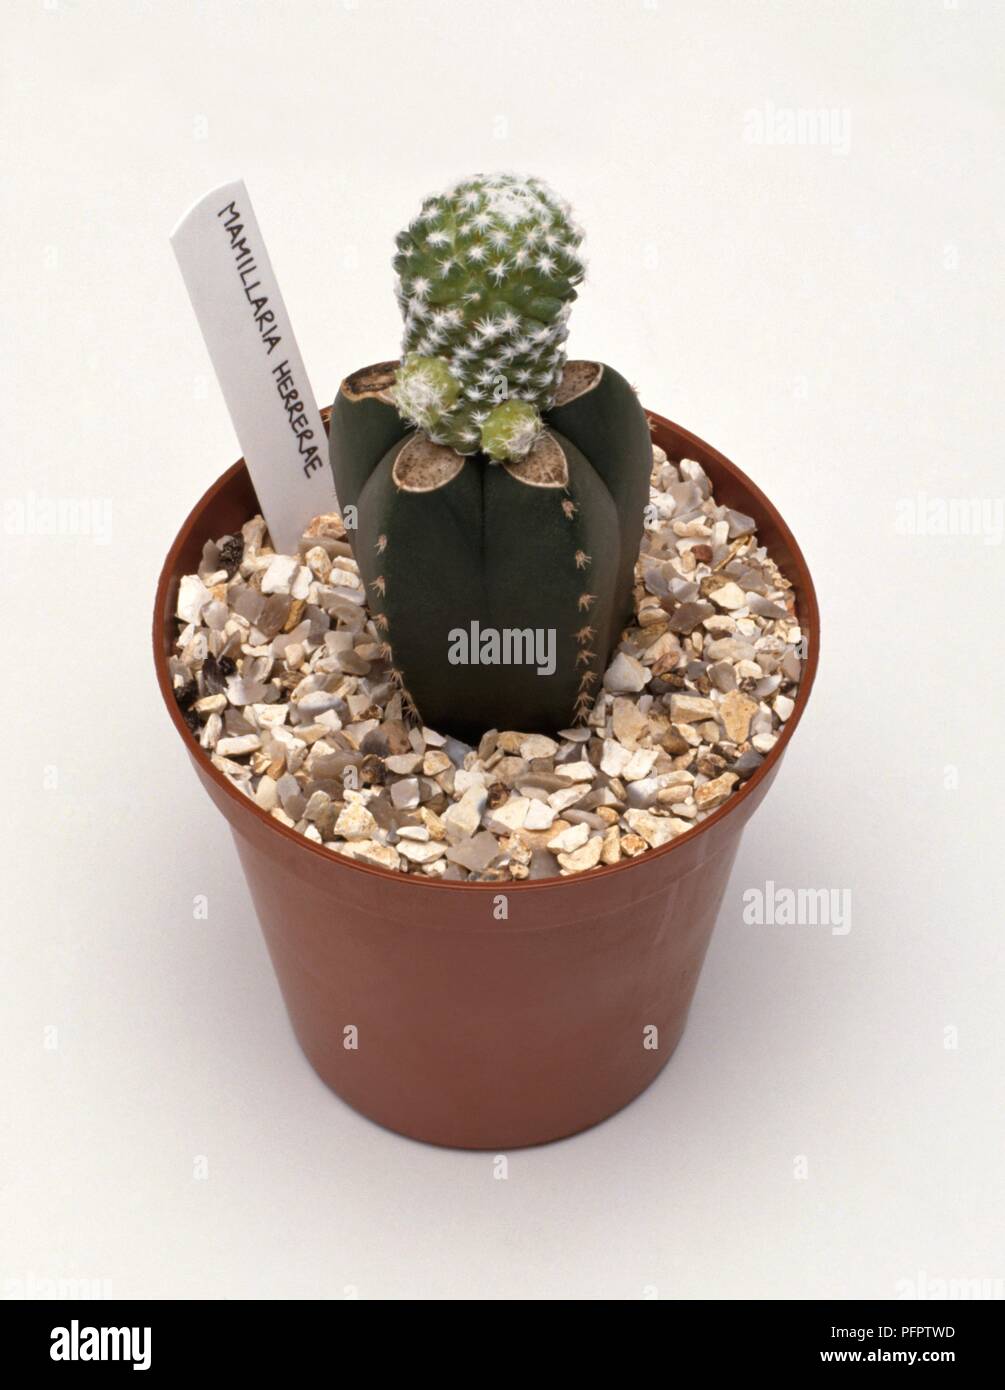 Mammillaria herrerae scion on top of stock in plant pot containing gravel and label Stock Photo